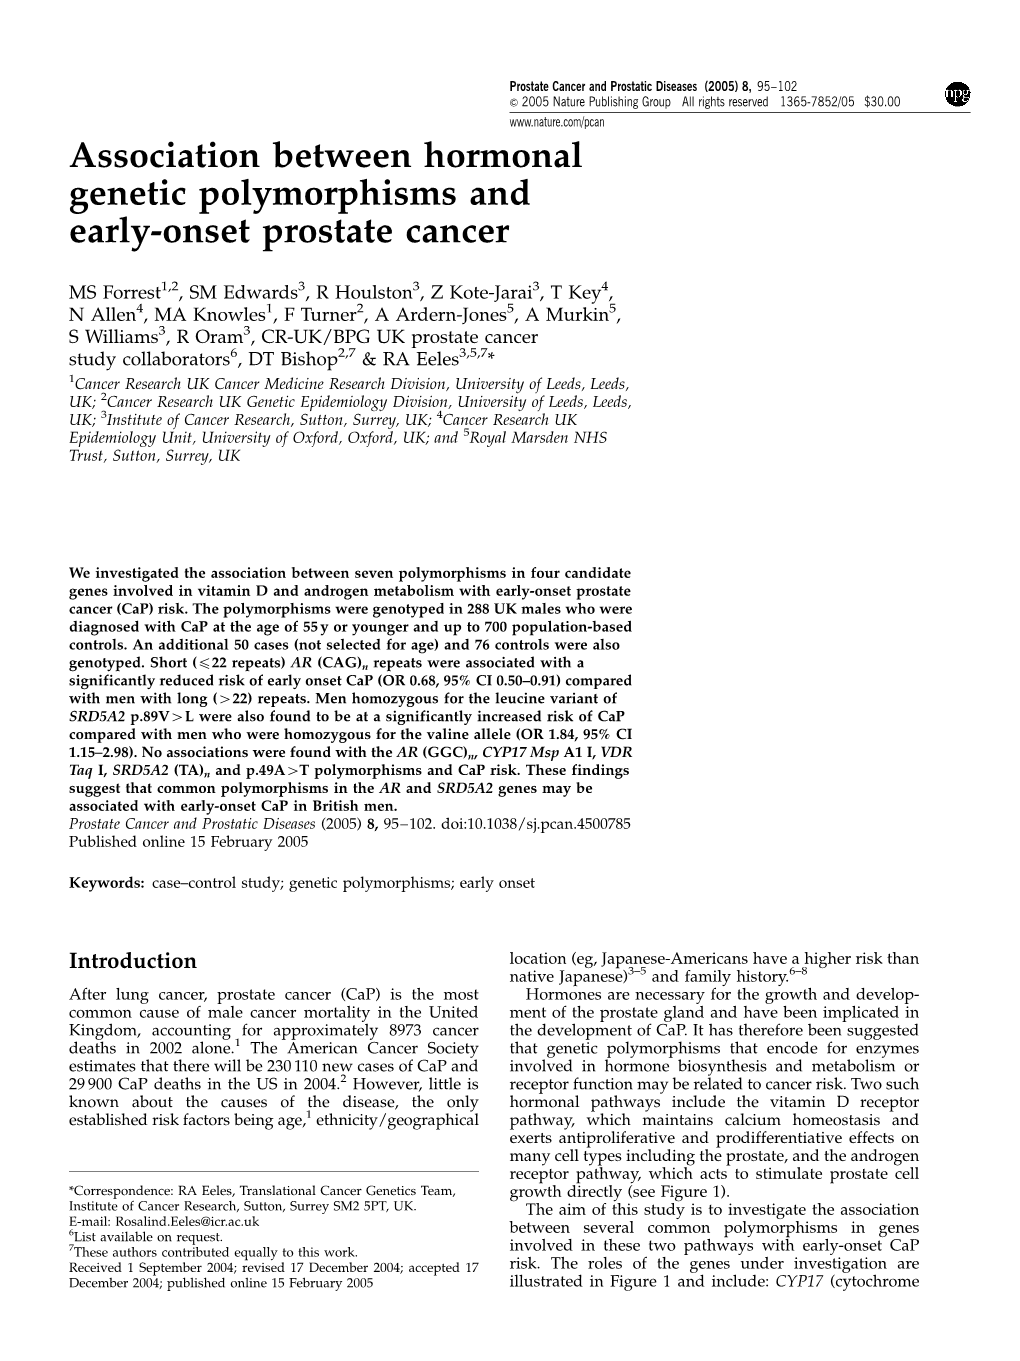 Association Between Hormonal Genetic Polymorphisms and Early-Onset Prostate Cancer